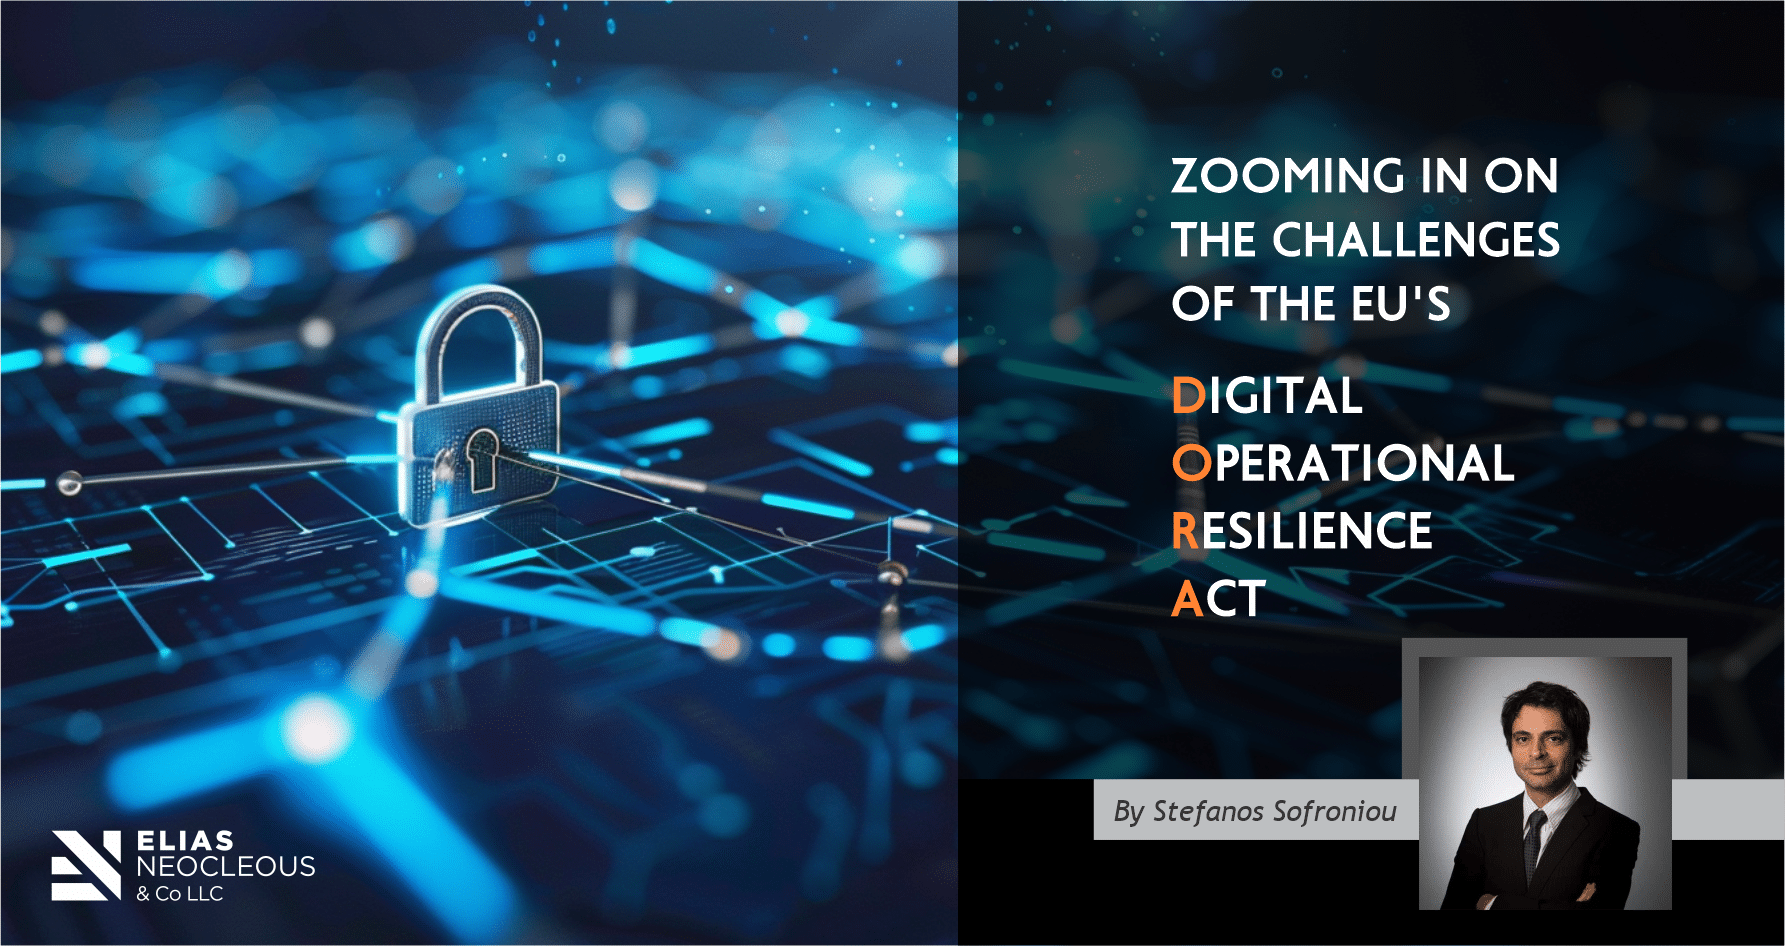 Zooming in on the challenges of the EU’s Digital Operational Resilience Act